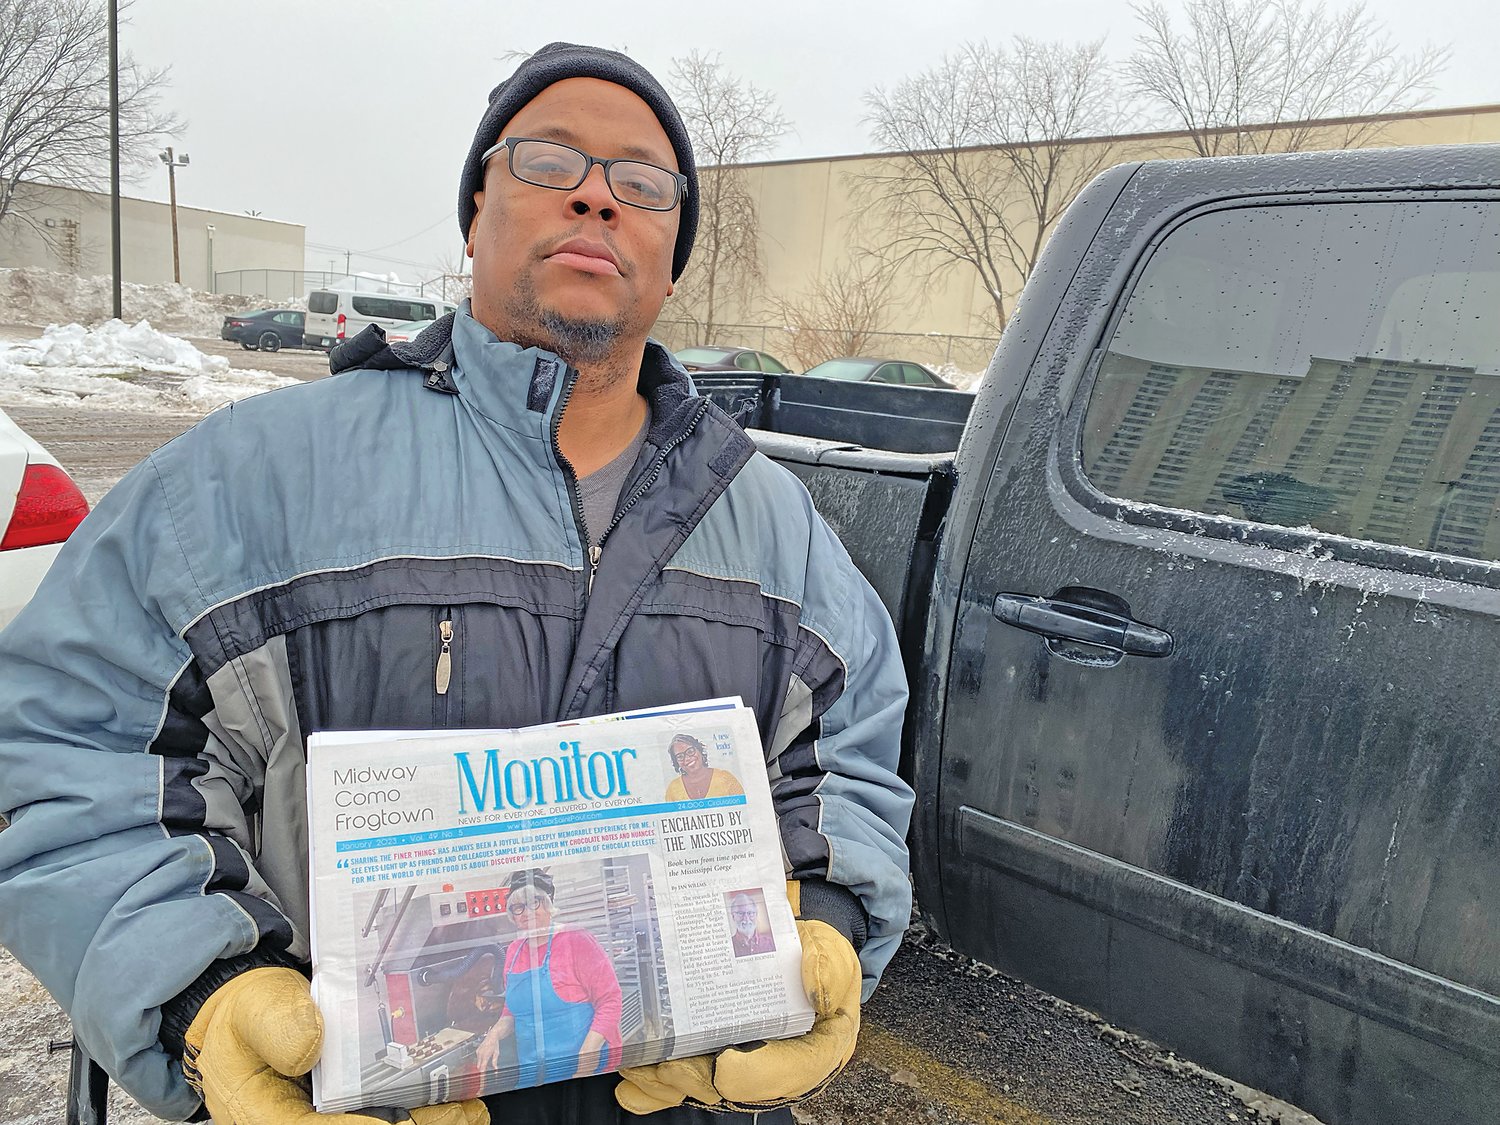 Lonnie Bosby delivers the Monitor in the area around his apartment building, Skyline Towers, a place he’s lived for 23 years.